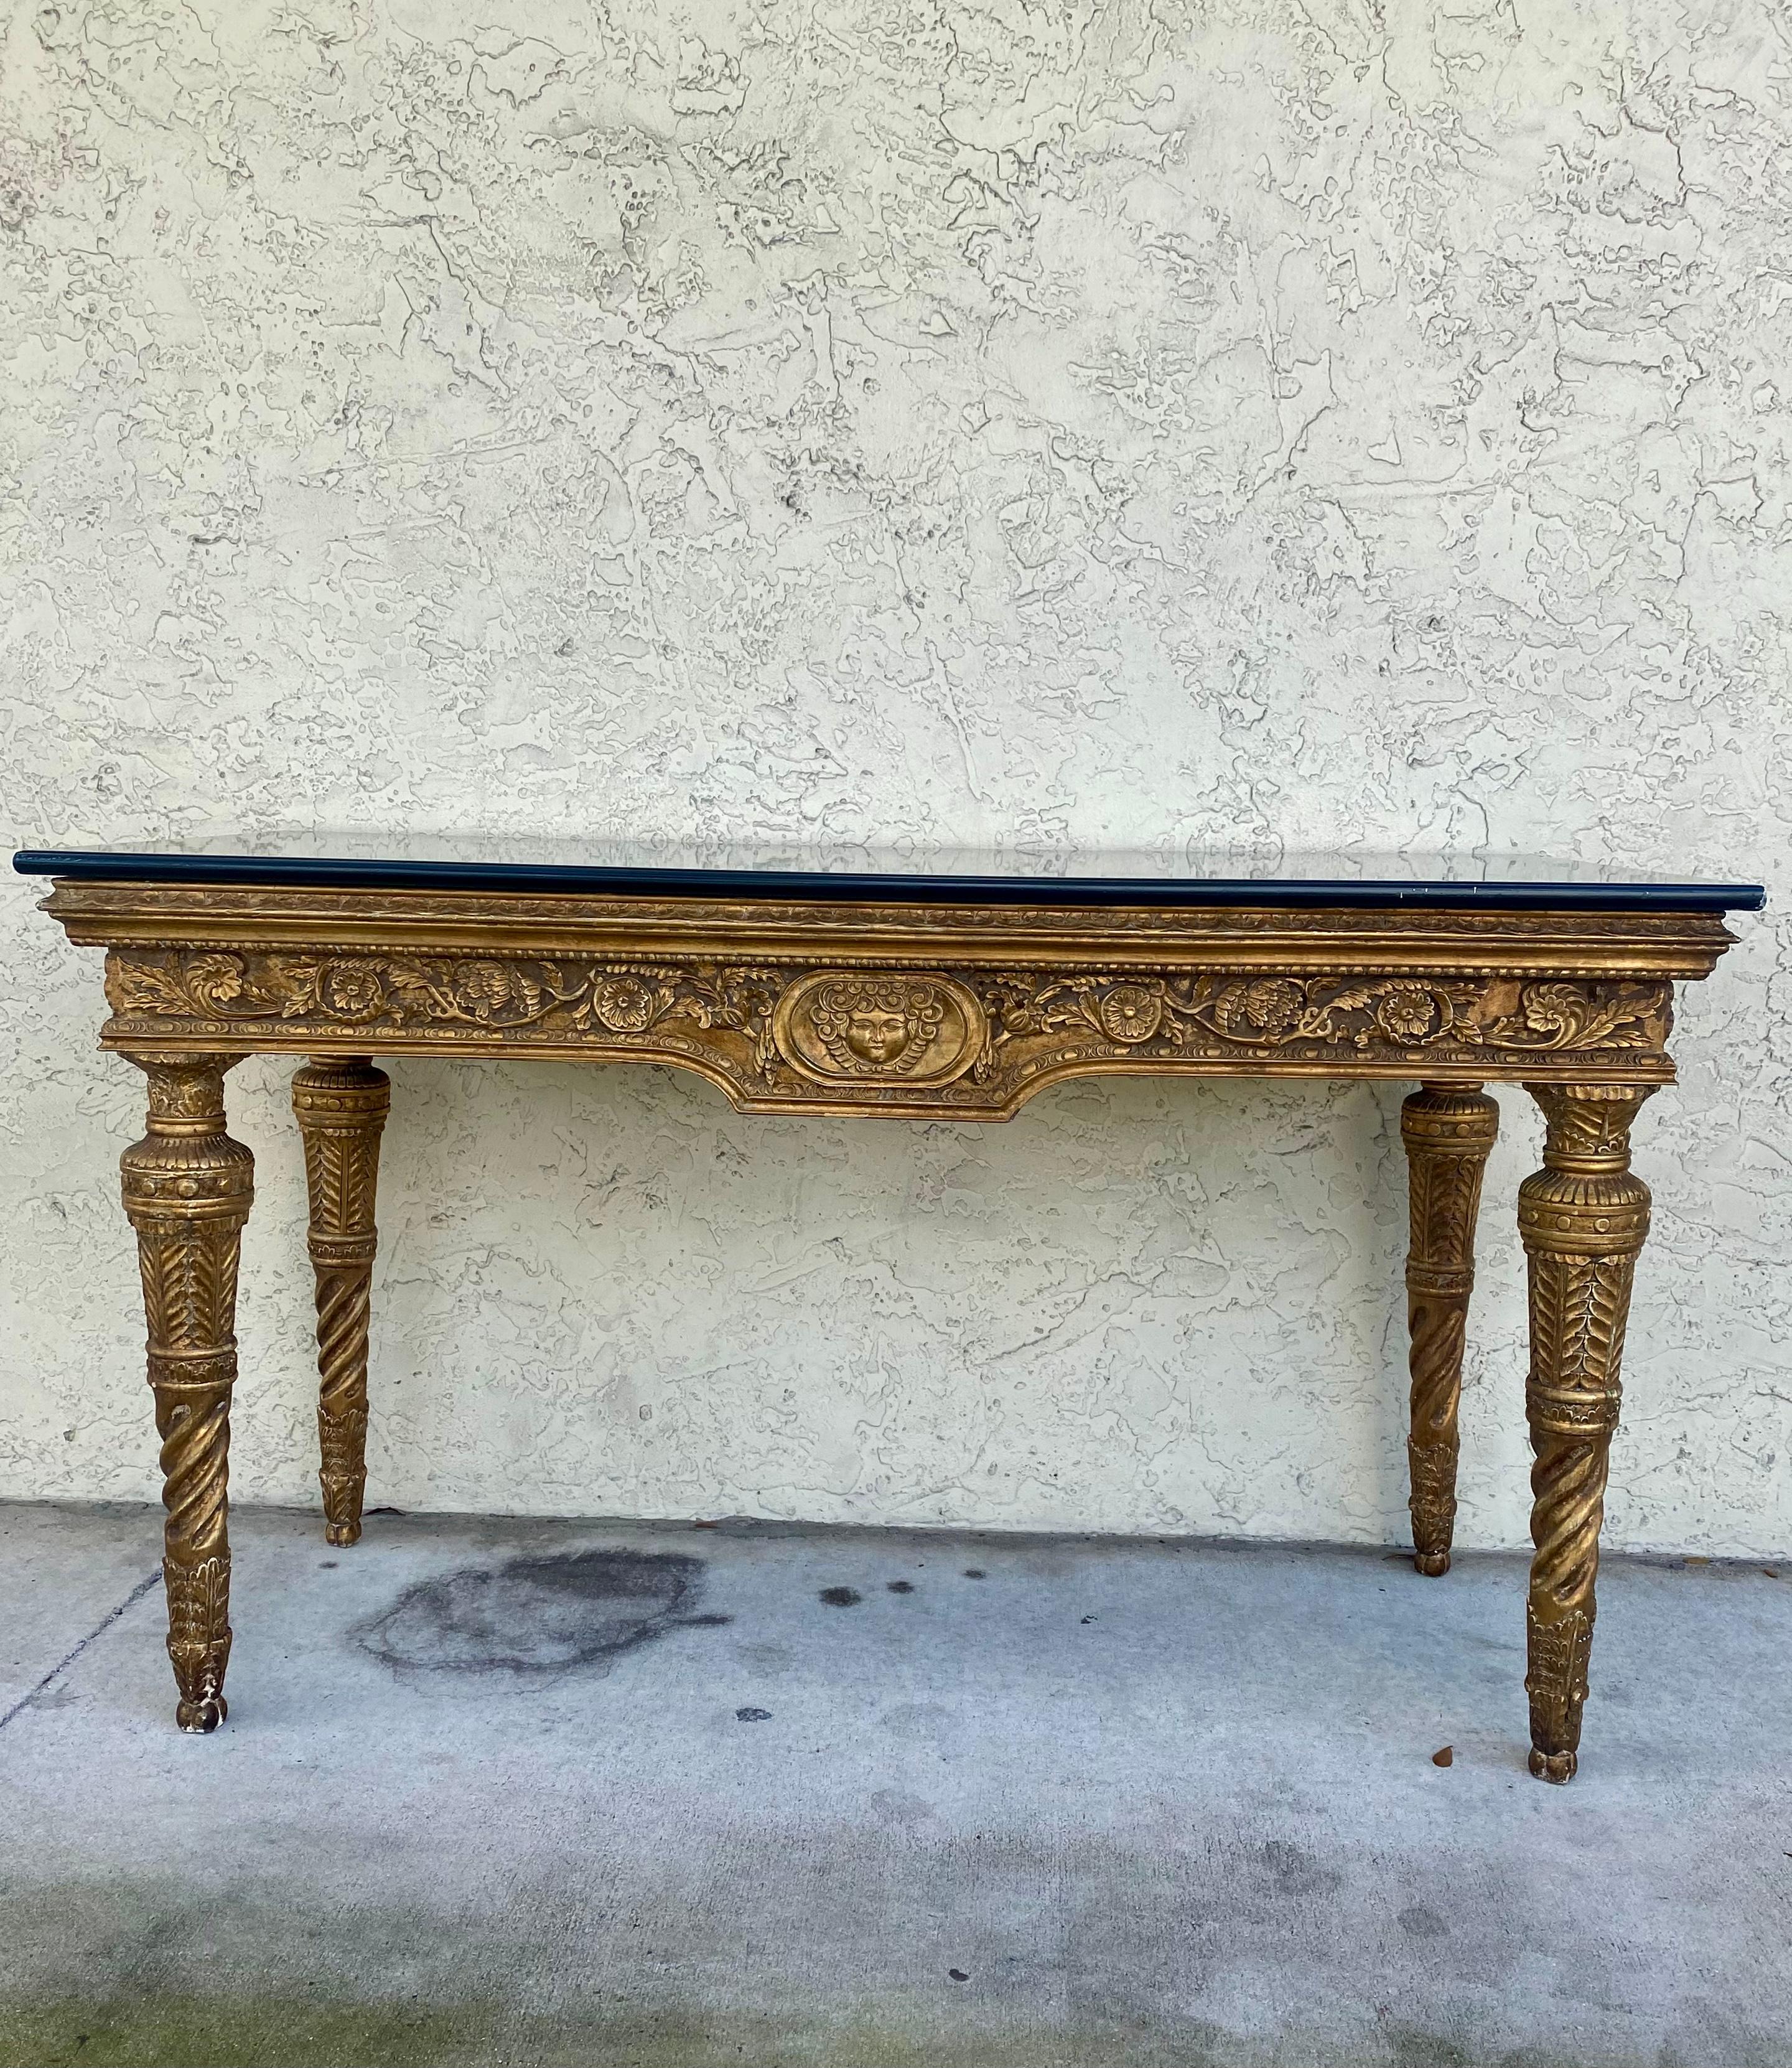 On offer on this occasion is one of the most stunning, table you could hope to find. This is an ultra-rare opportunity to acquire what is, unequivocally, the best of the best, it being a most spectacular and beautifully-presented table. Outstanding